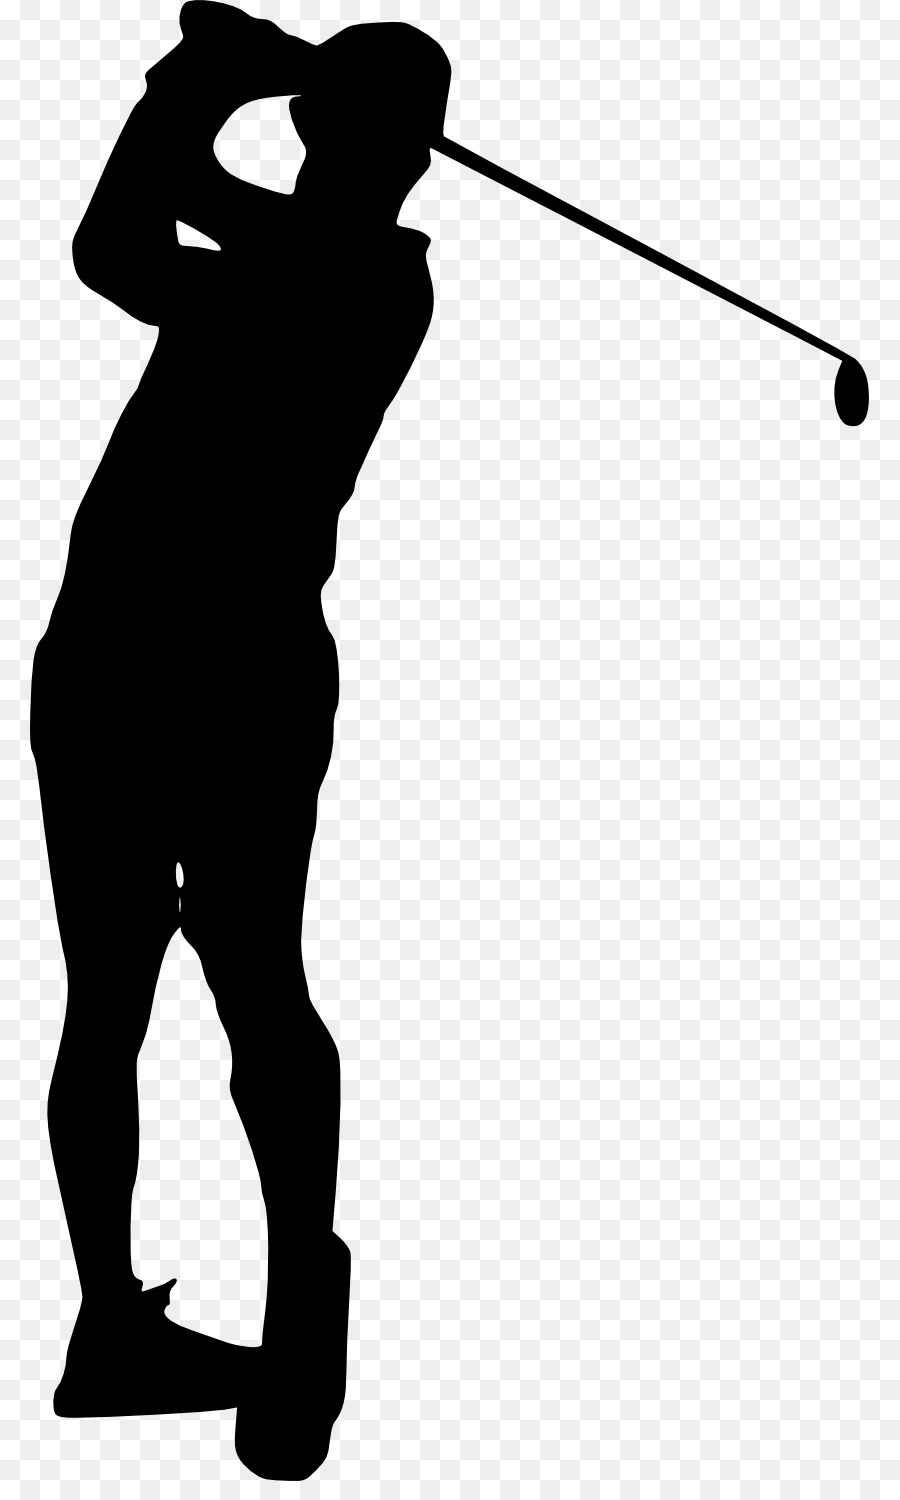 Golf Balls Sport Golfer Silhouette - Silhouette png download - 839*1481 - Free Transparent Golf png Download.